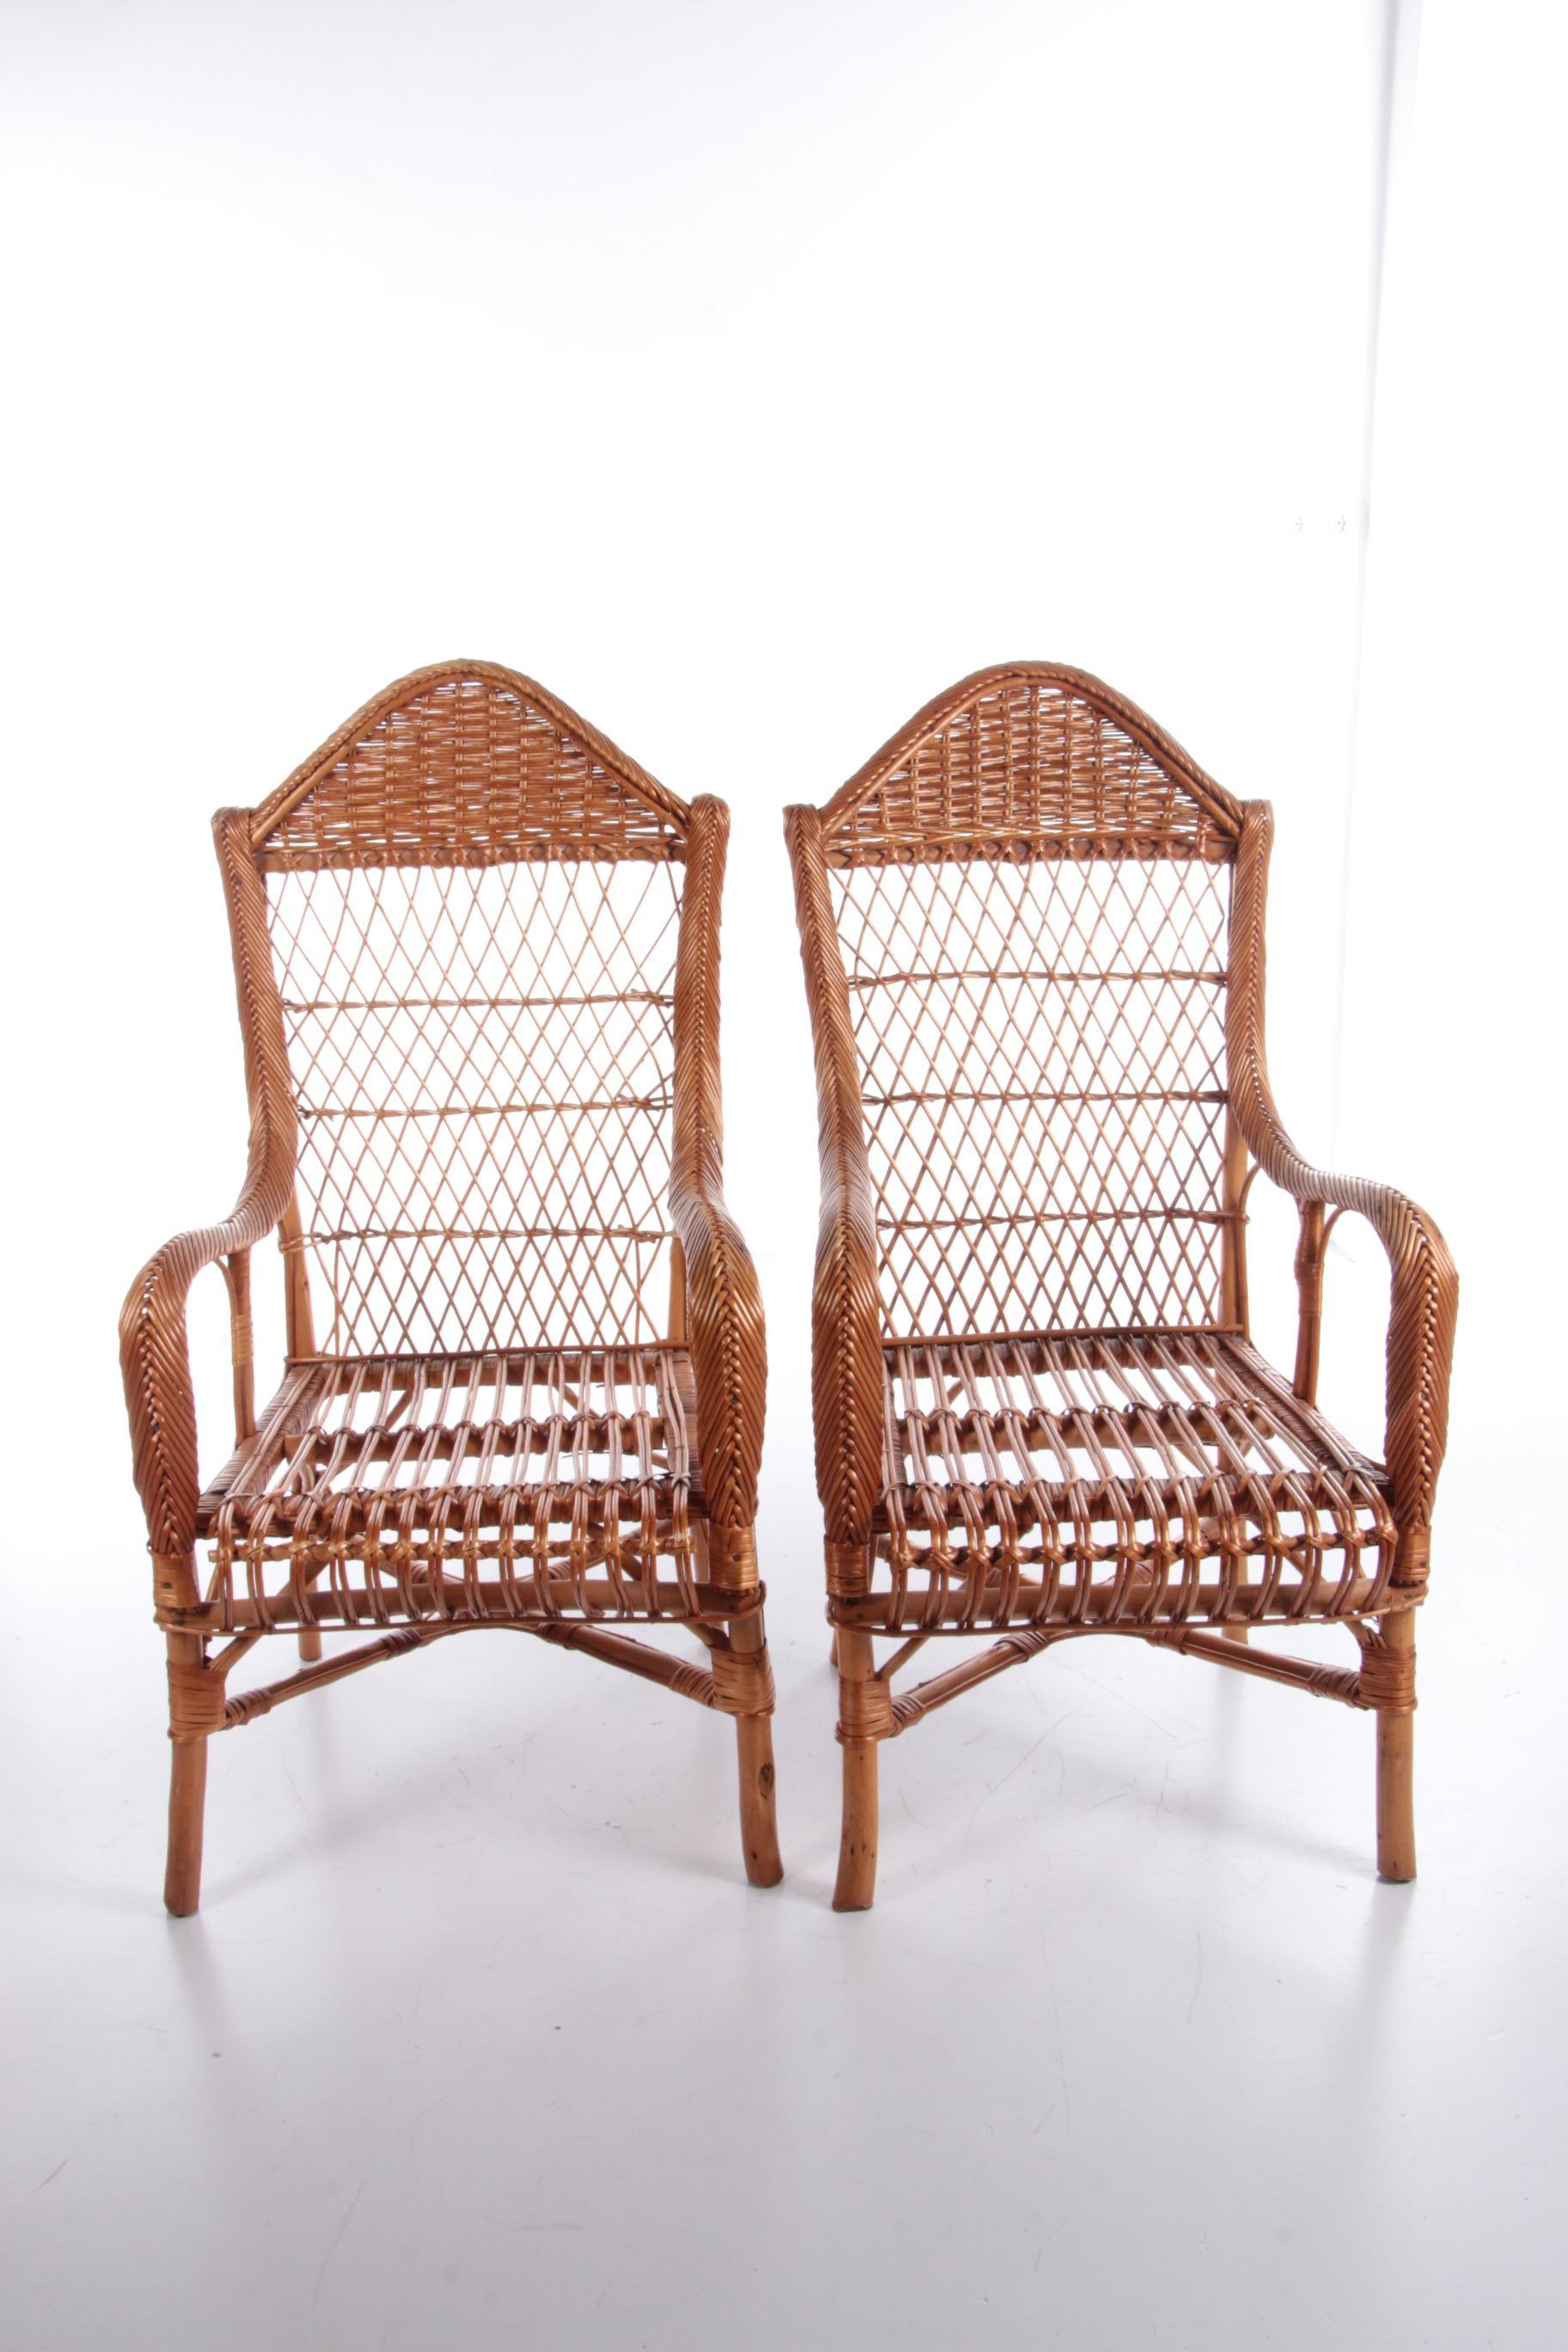 Vintage set of 2 rattan chairs made around 1960s, the Netherlands.

This is a nice set of 2 rattan chairs to experience the cozy atmosphere of Bohemian.

Old vintage Dutch rattan armchair with braided parts in various ways, including the